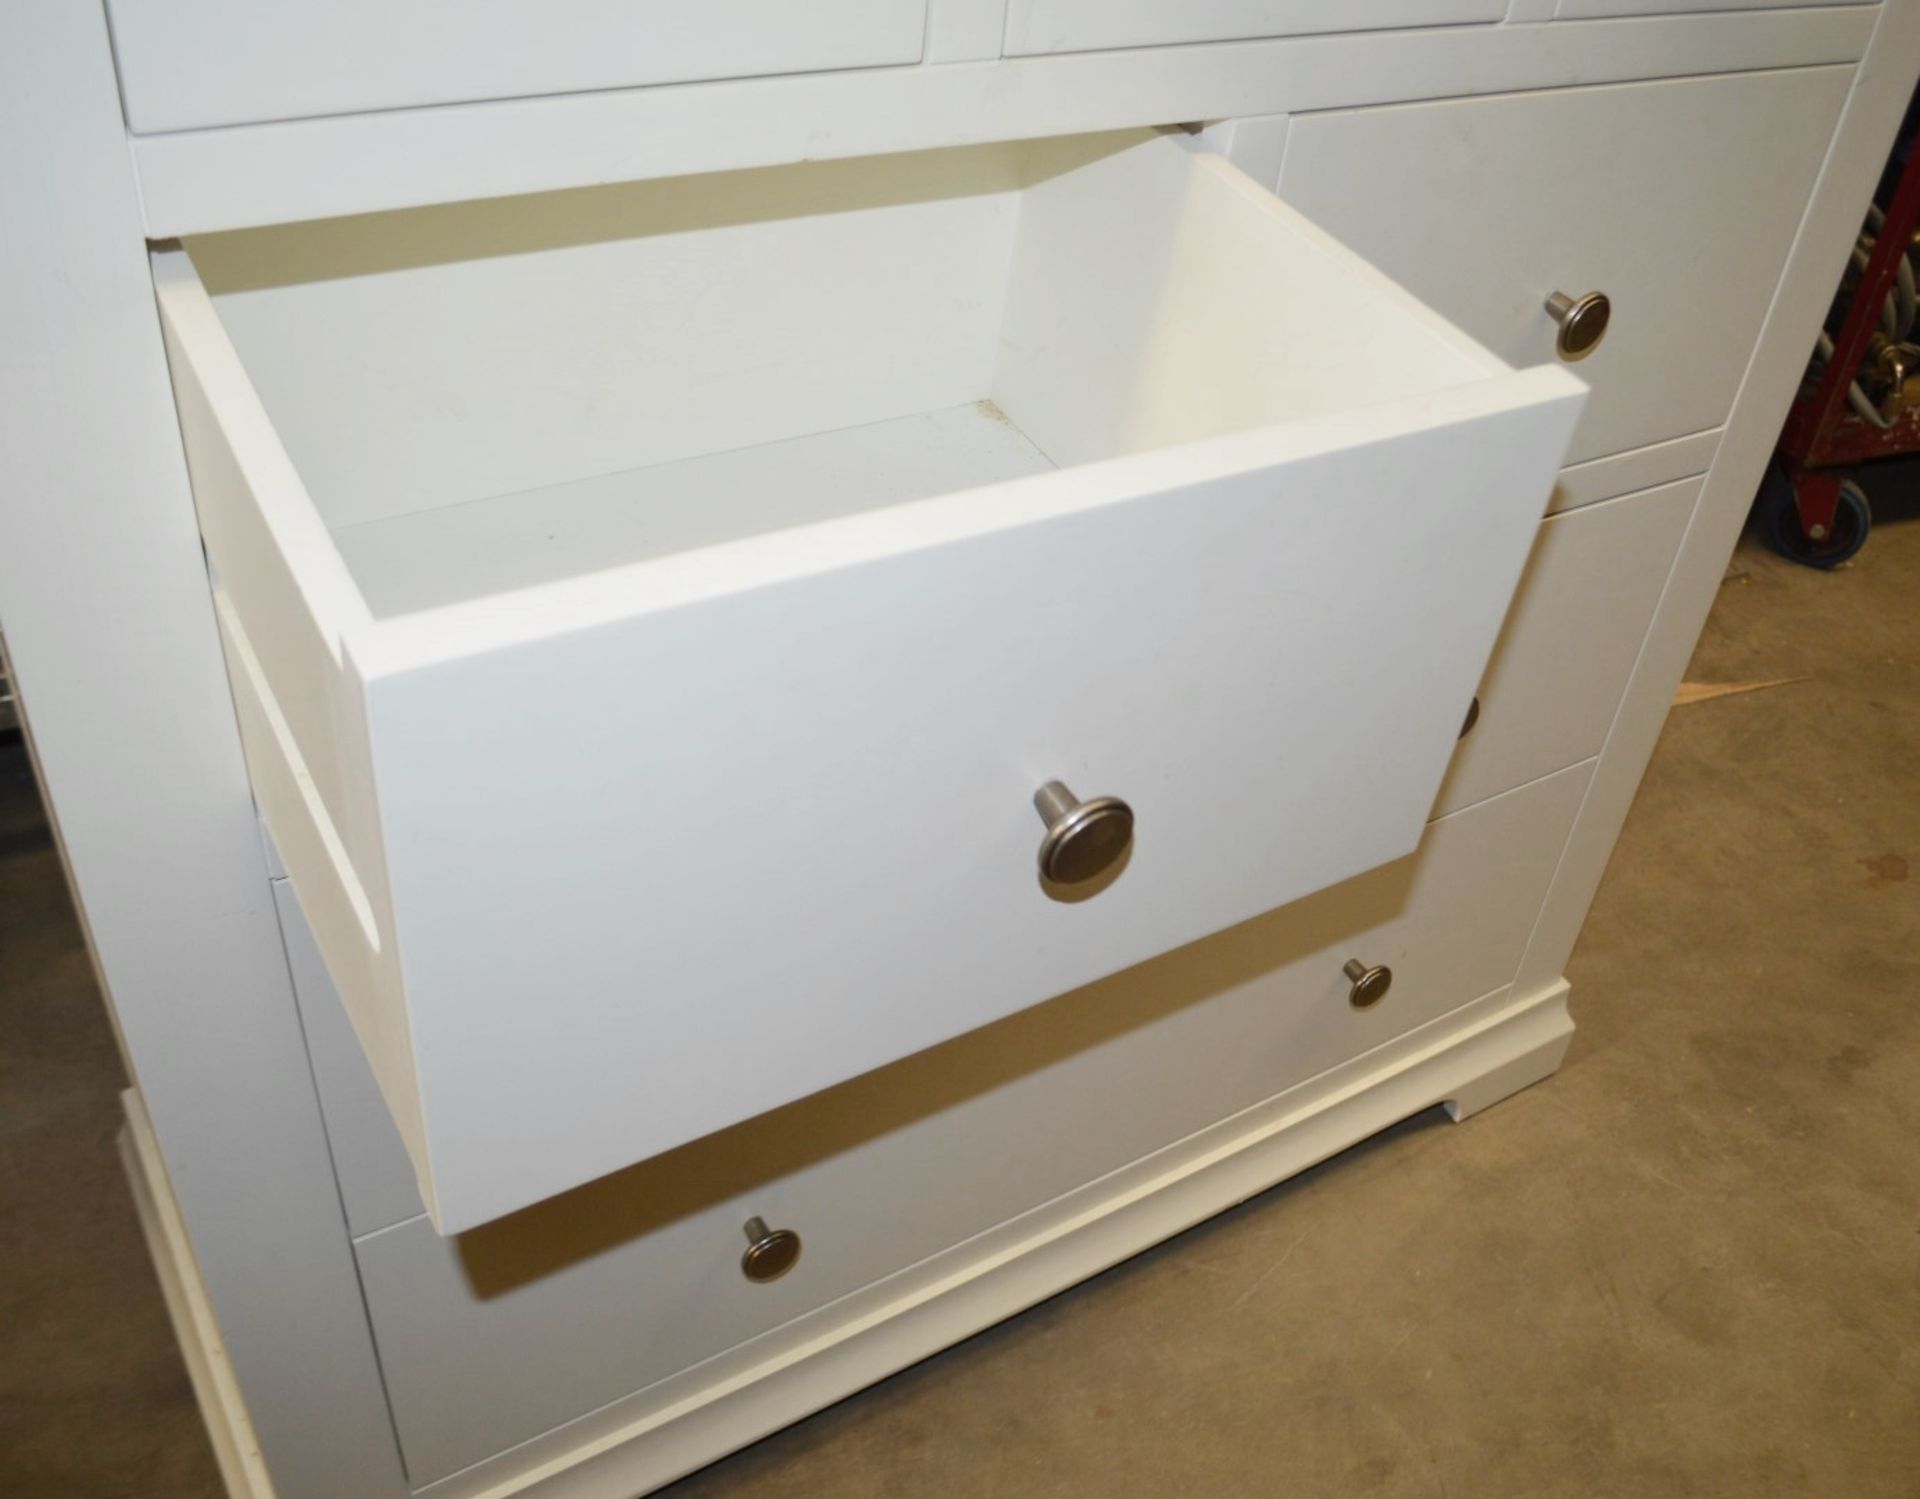 1 x Tall Drawer Unit In Cream - From An Exclusive Property In Hale Barns - Dimensions: 105 x 42 x - Image 5 of 6